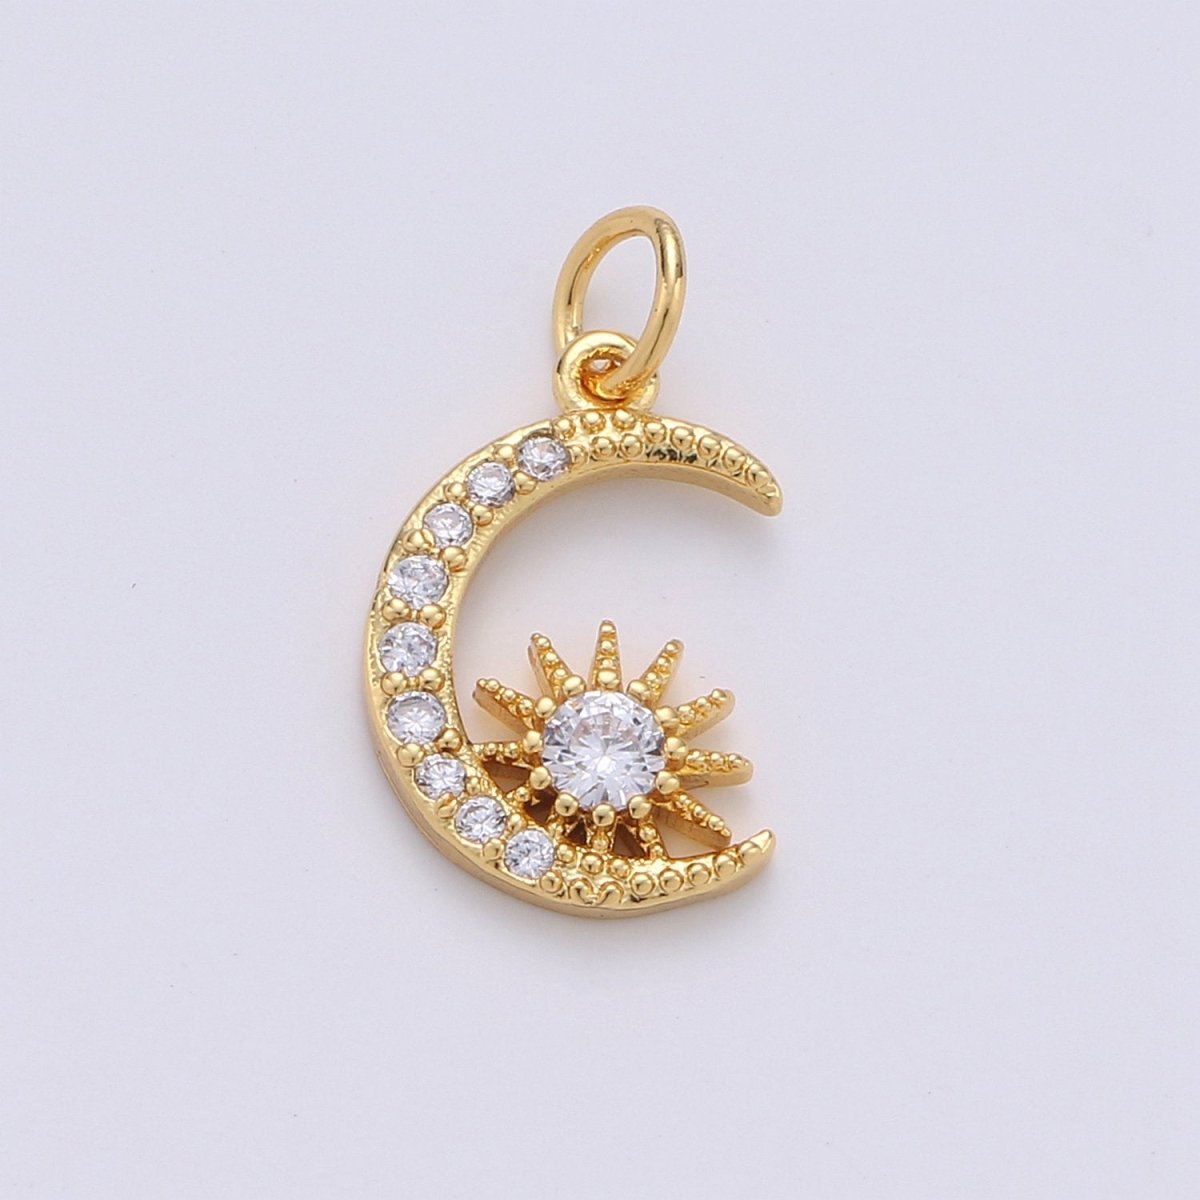 24k Gold Filled Micro Pave Moon Charm, Cubic Star Moon Pendant Charm, Gold Filled Charm, For DIY Necklace Bracelet Earring D-236 - DLUXCA